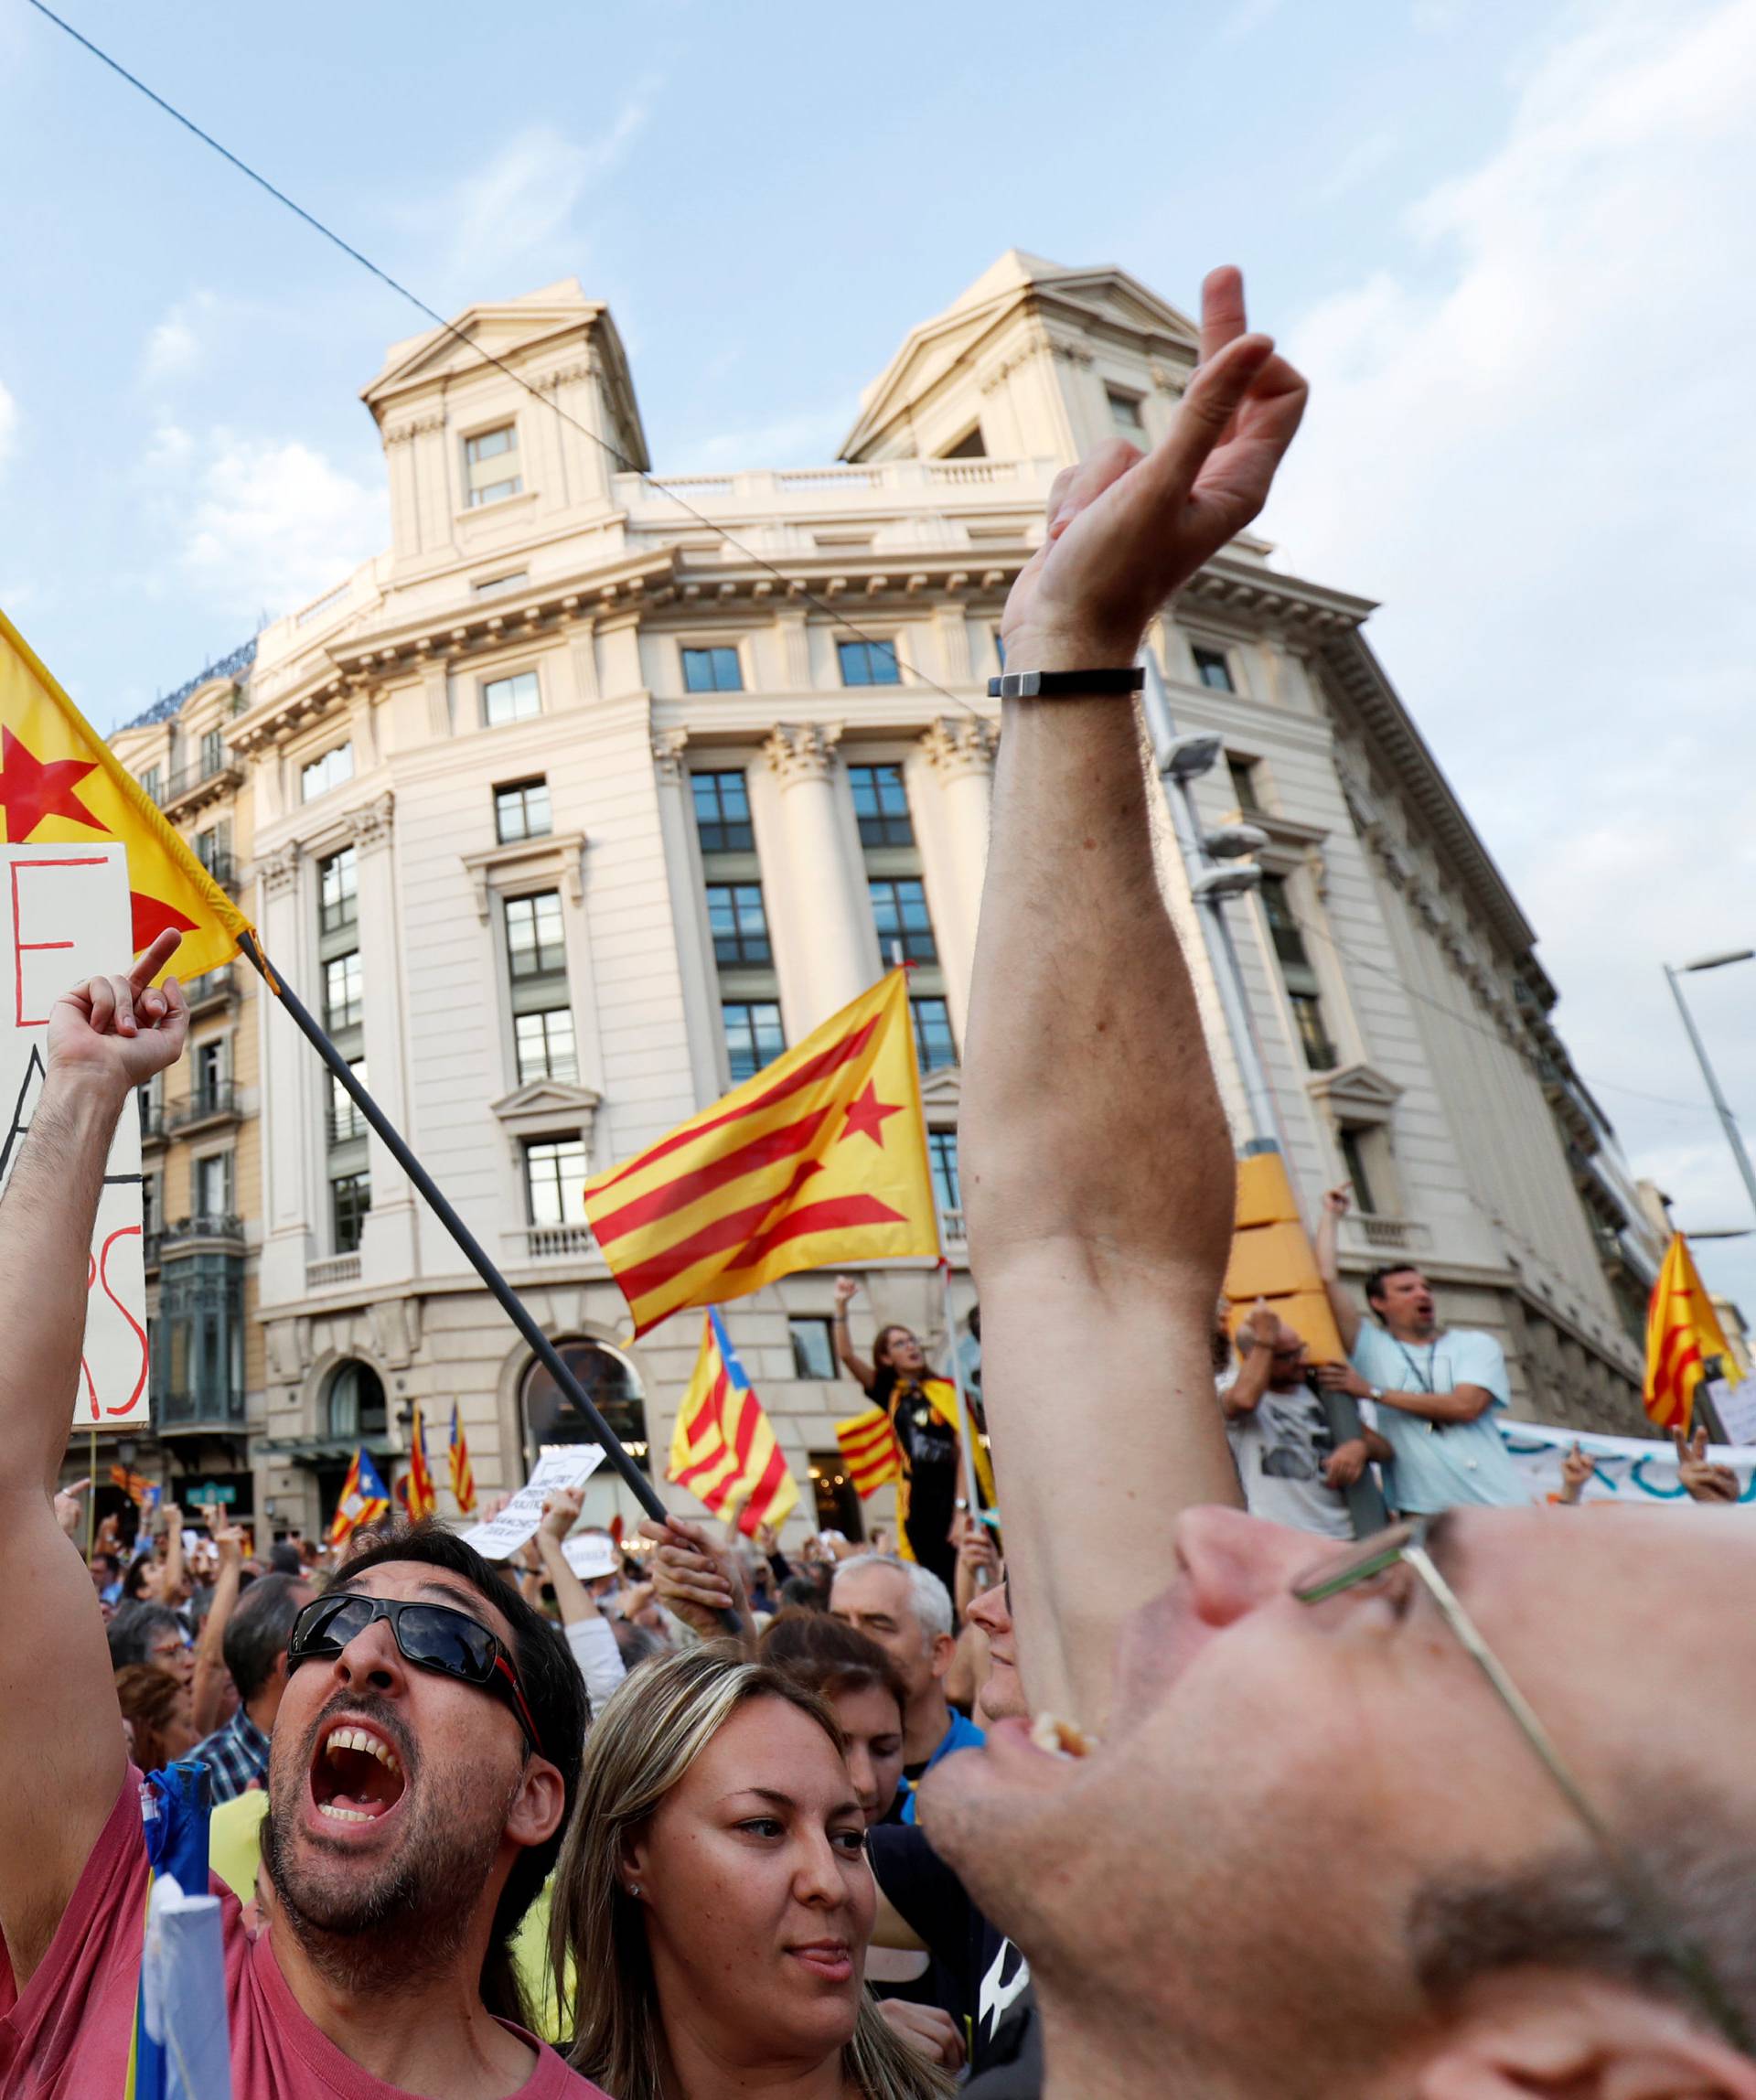 Protesters react to a police helicopter flying overhead during a demonstration organised by Catalan pro-independence movements ANC (Catalan National Assembly) and Omnium Cutural, following the imprisonment of their two leaders, in